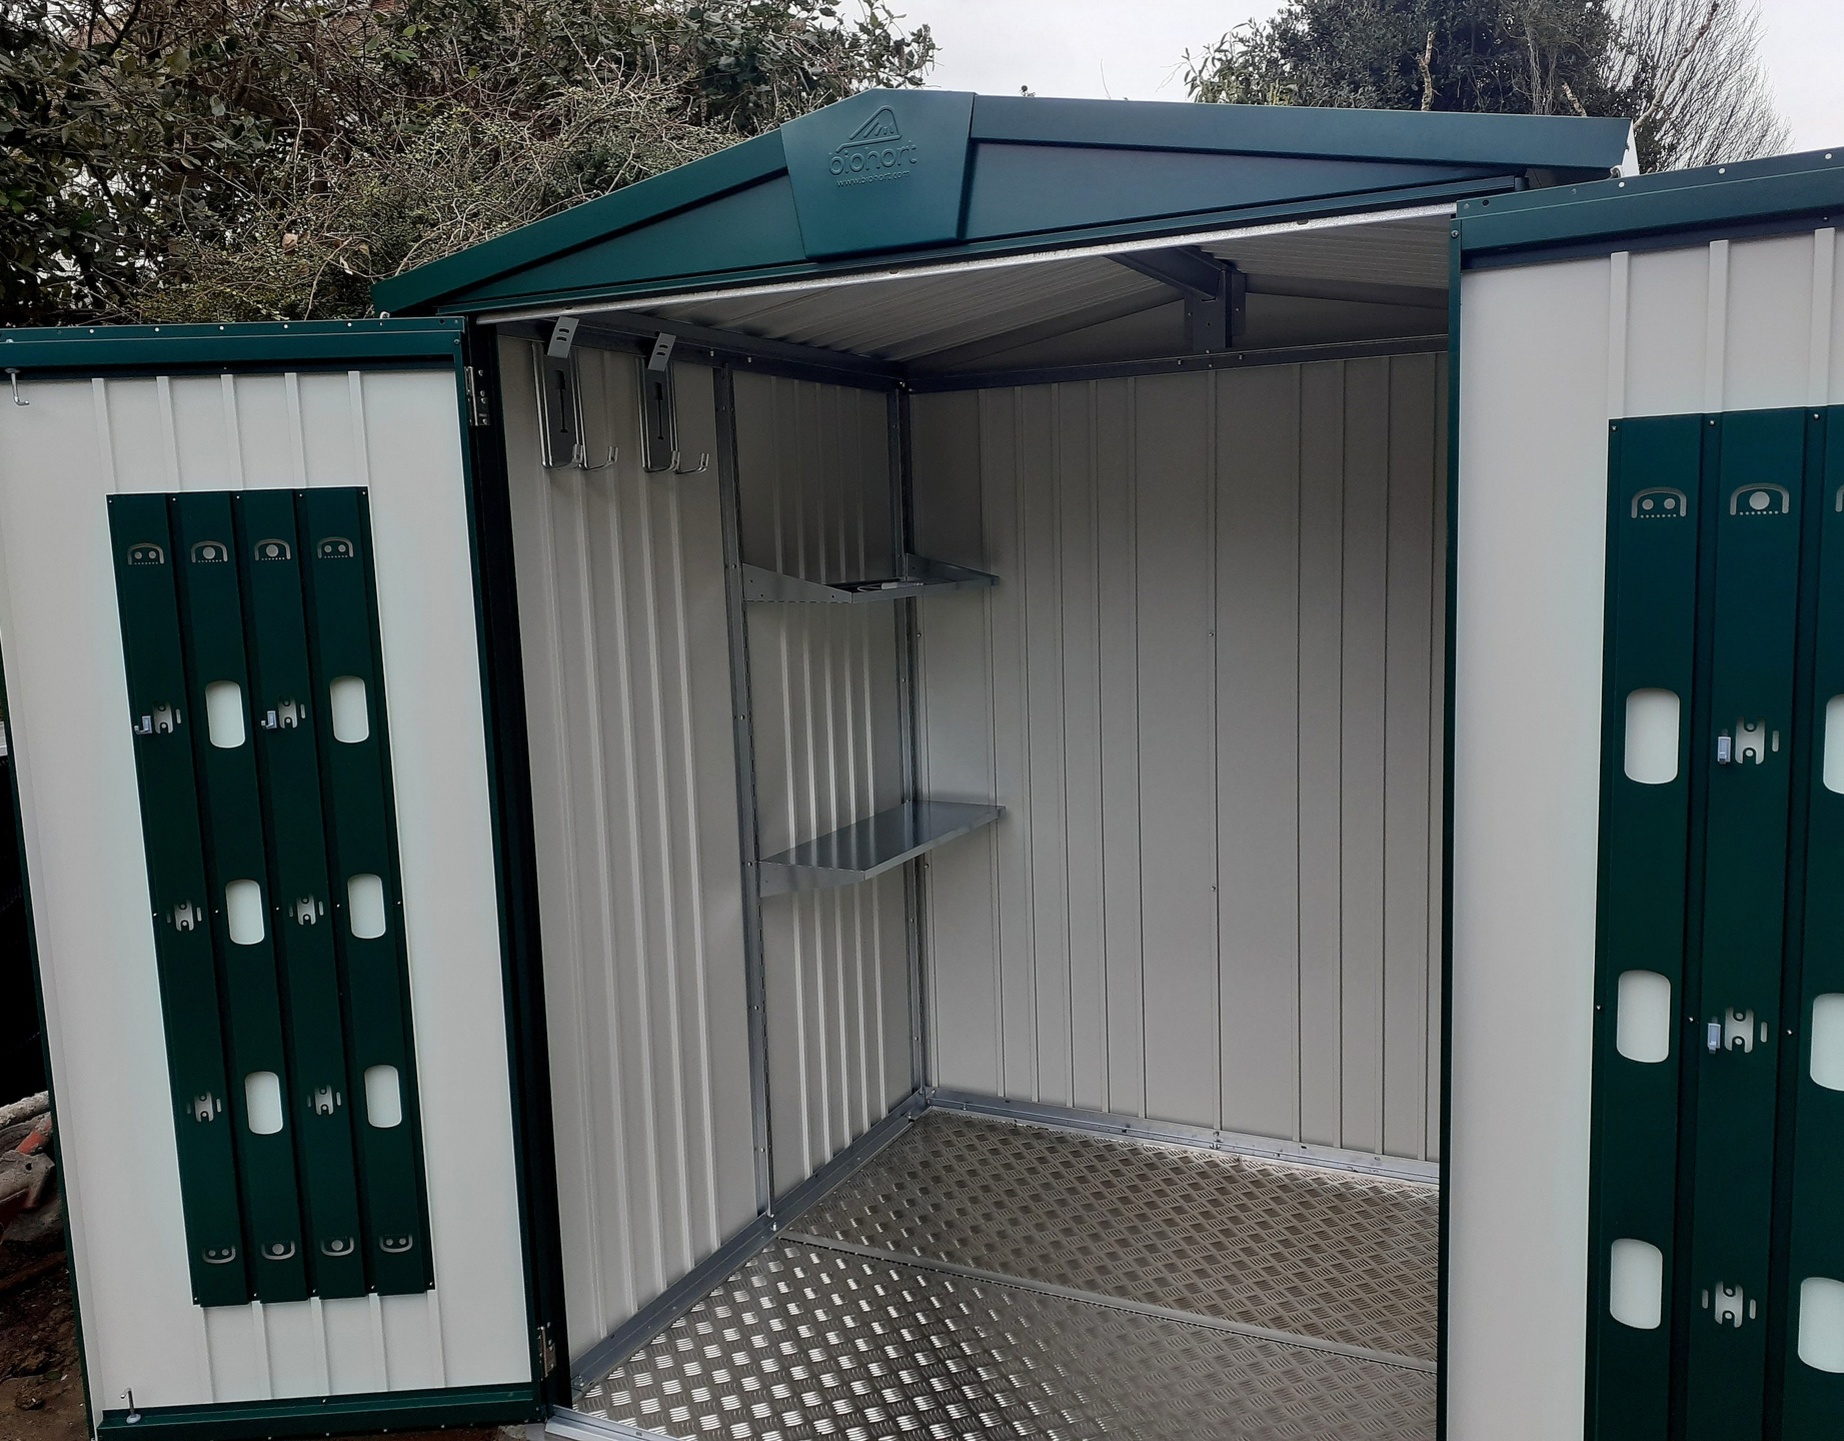 Biohort Europa 2 Garden Shed - exceptional value for a quality steel garden shed, blending functionality, durability and classic design  |  Supplied + Fitted in Ranelagh, Dublin 6 by Owen Chubb Landscapers - Ireland's premier Biohort Supplier & Installer.